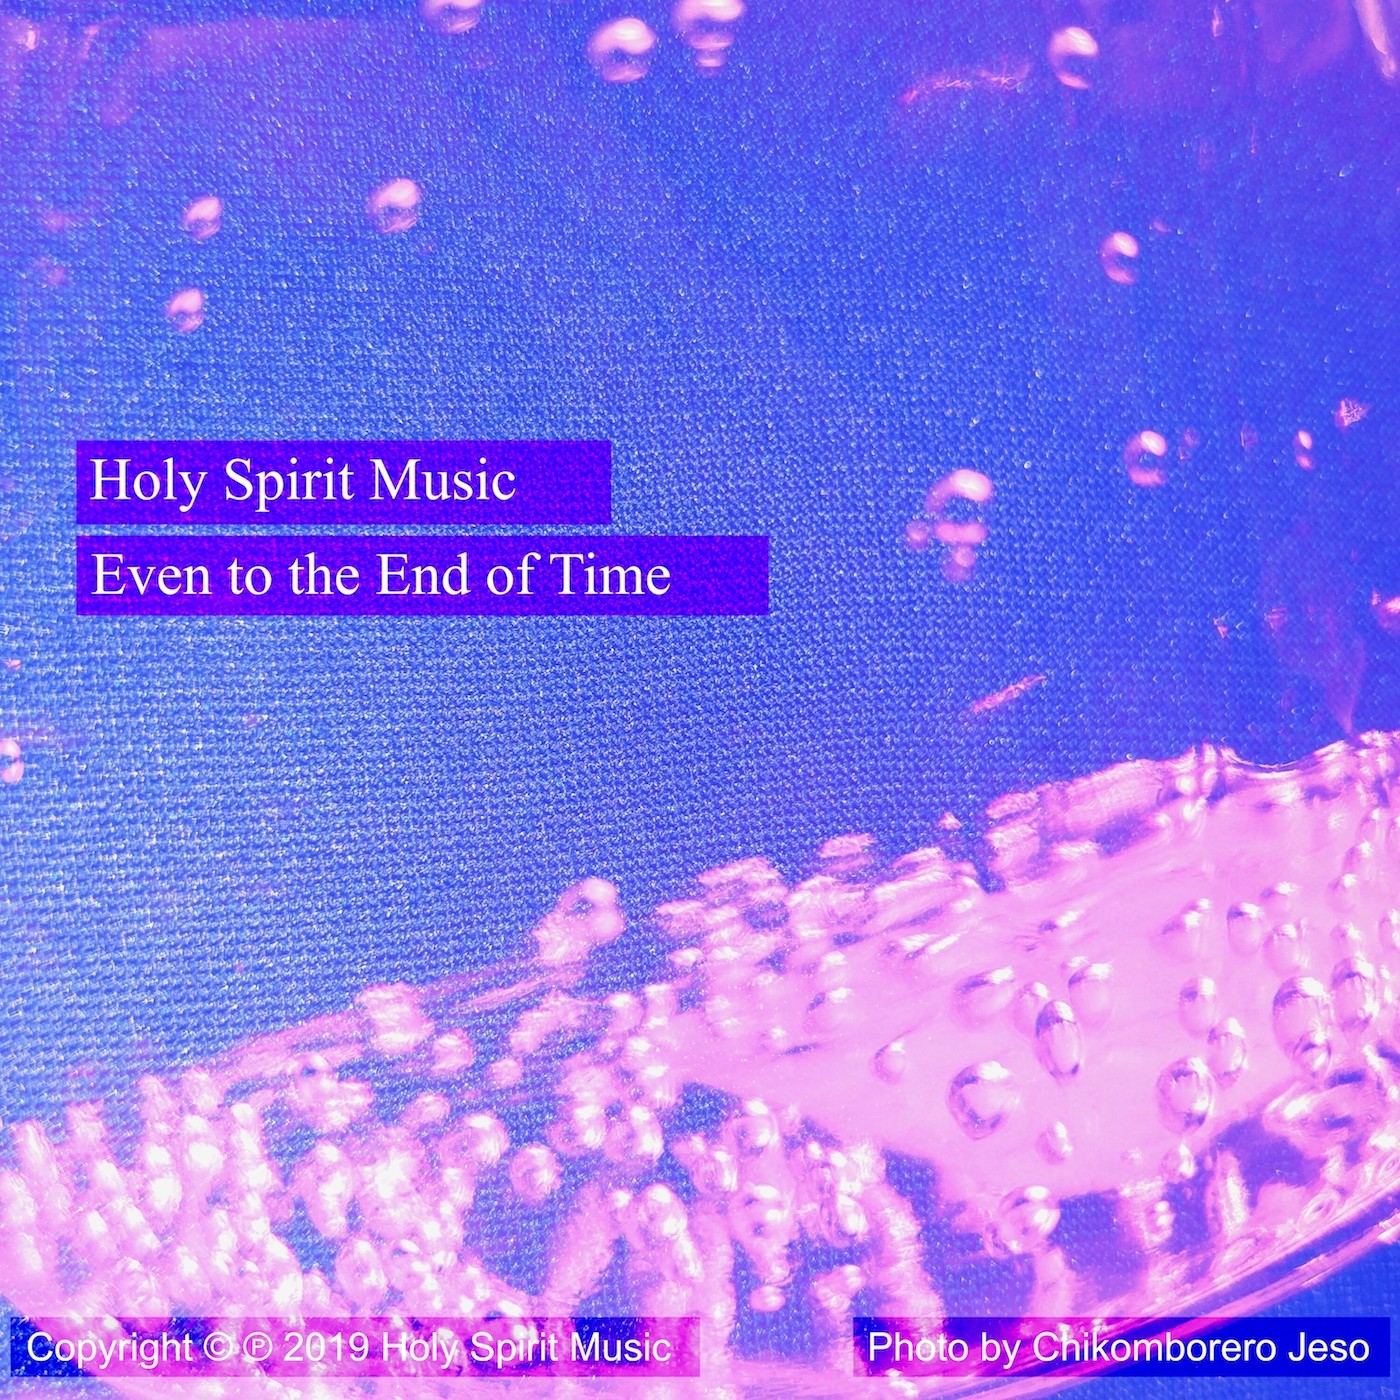 Holy Spirit Music - Even to the End of Time - Music Cover Art